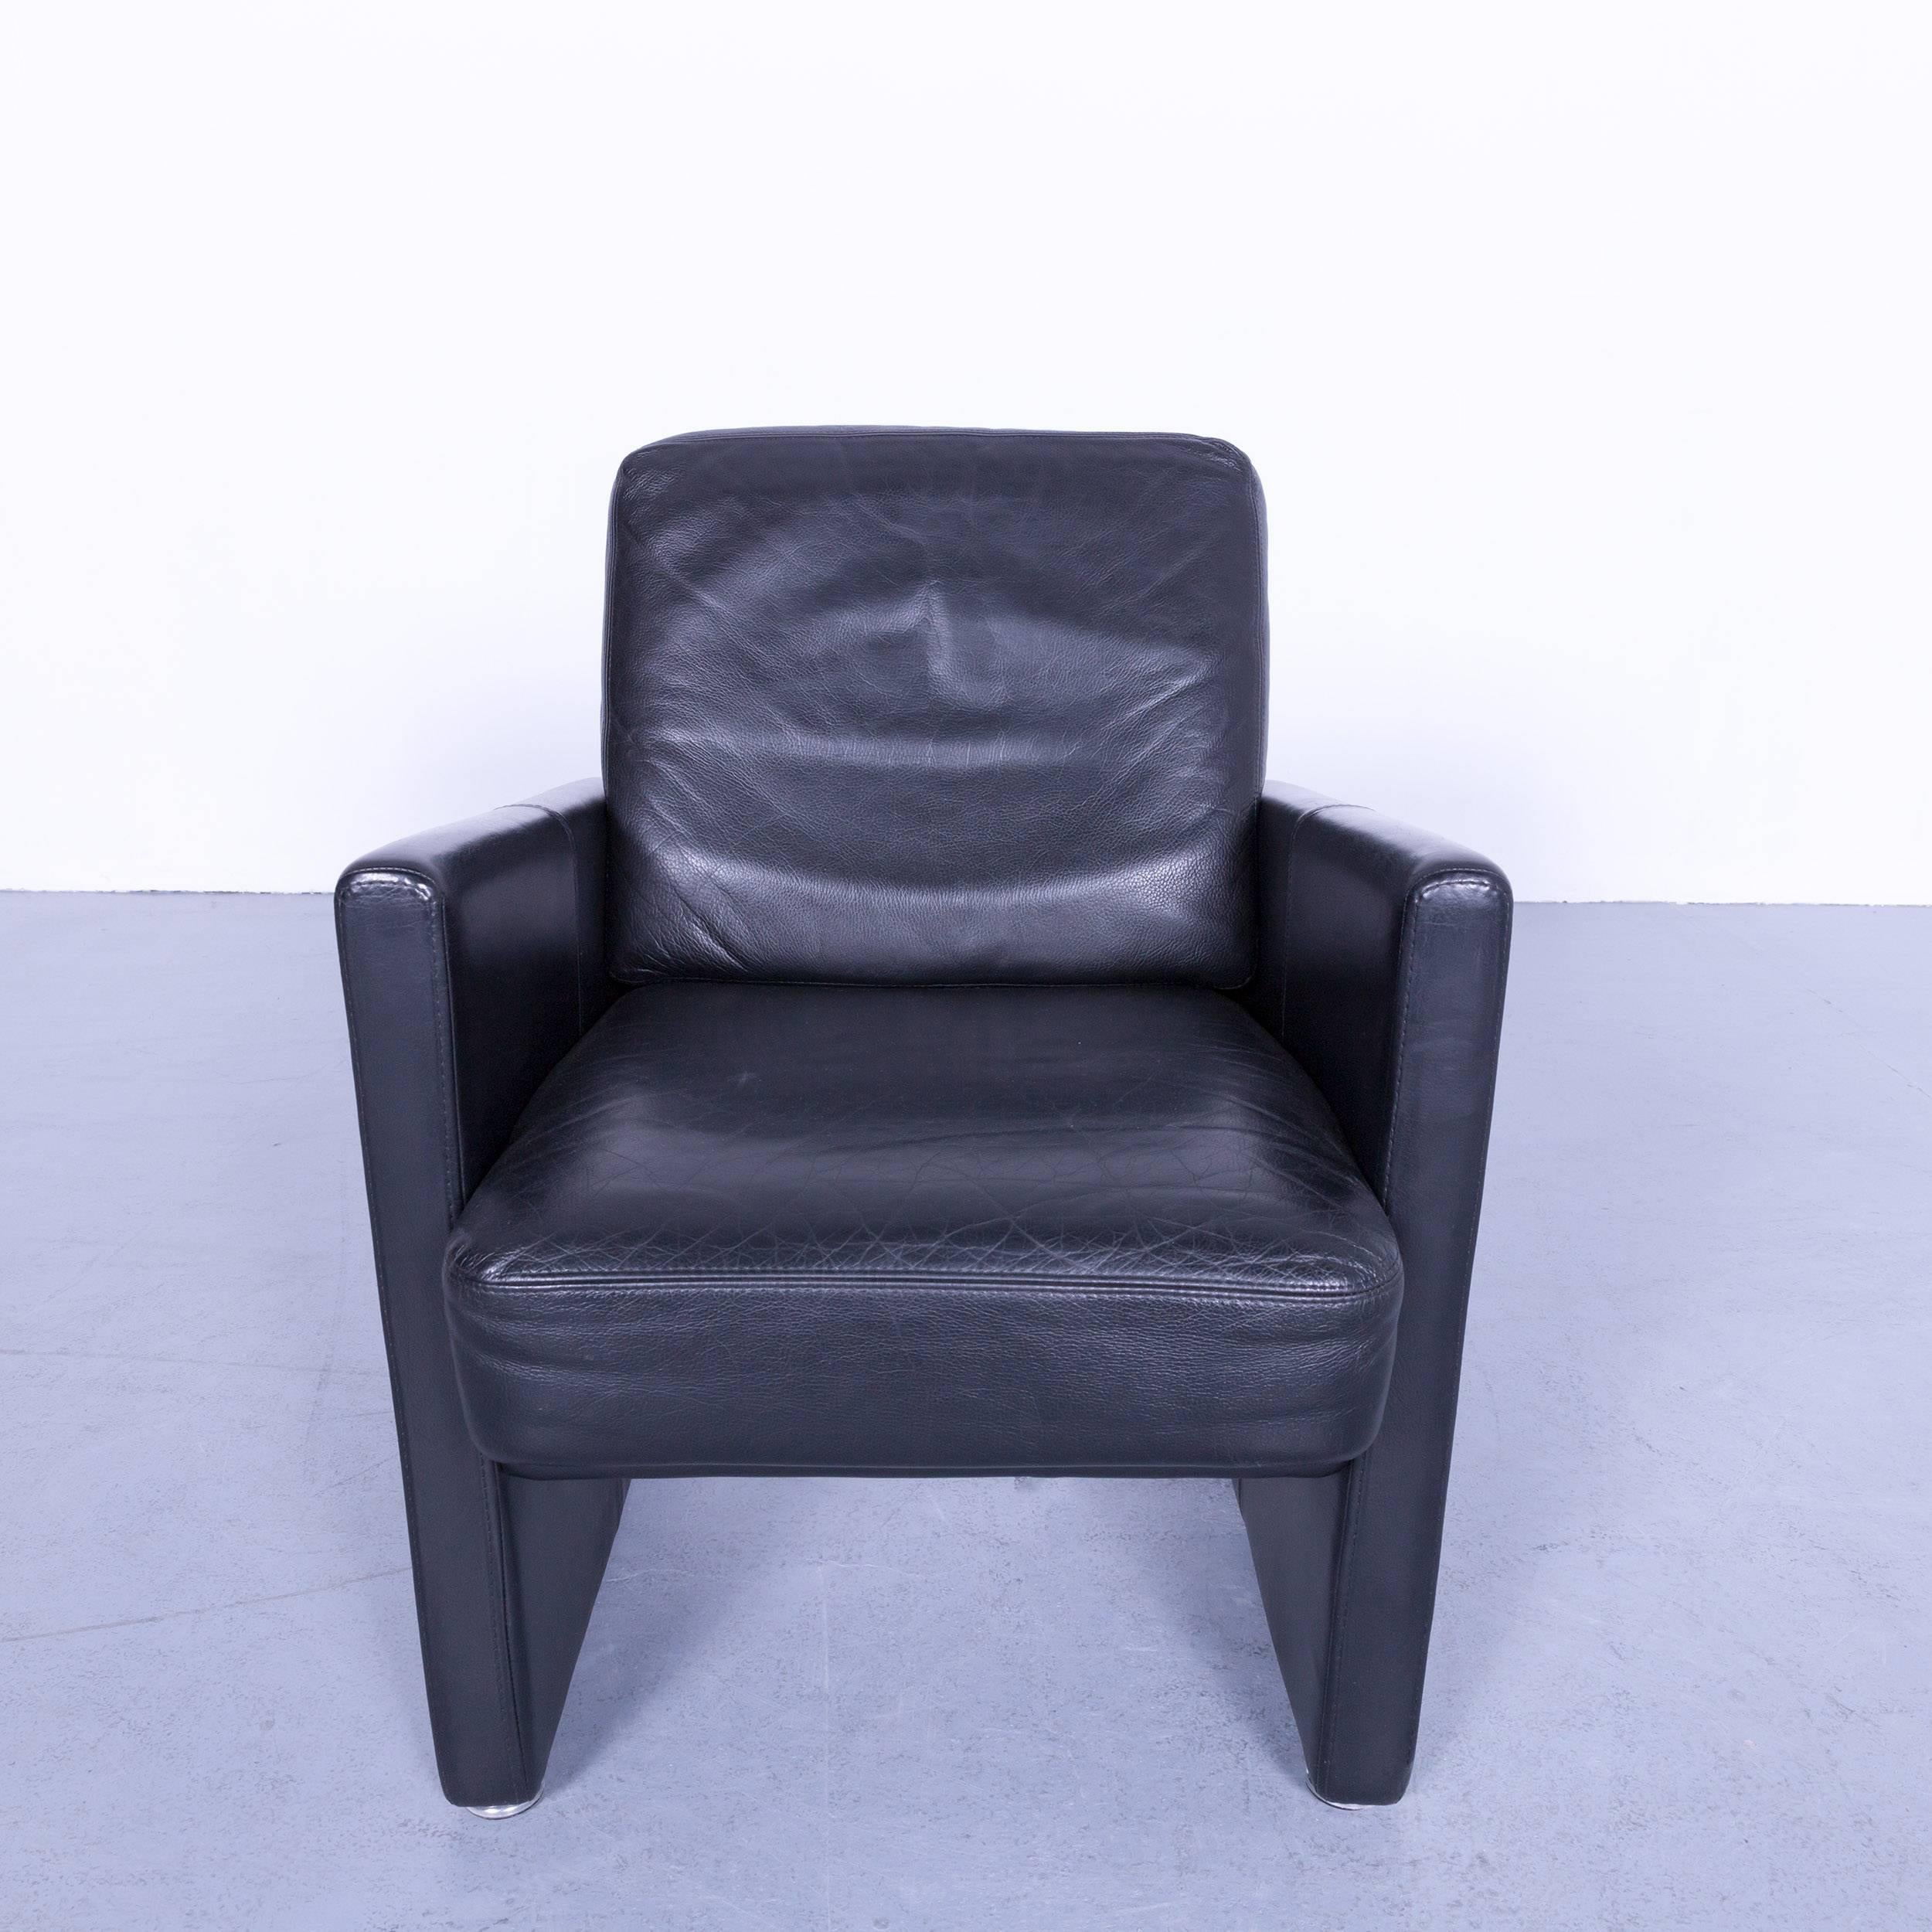 Brühl & Sippold Designer Armchair Black Leather Simple Form Made in Germany 1